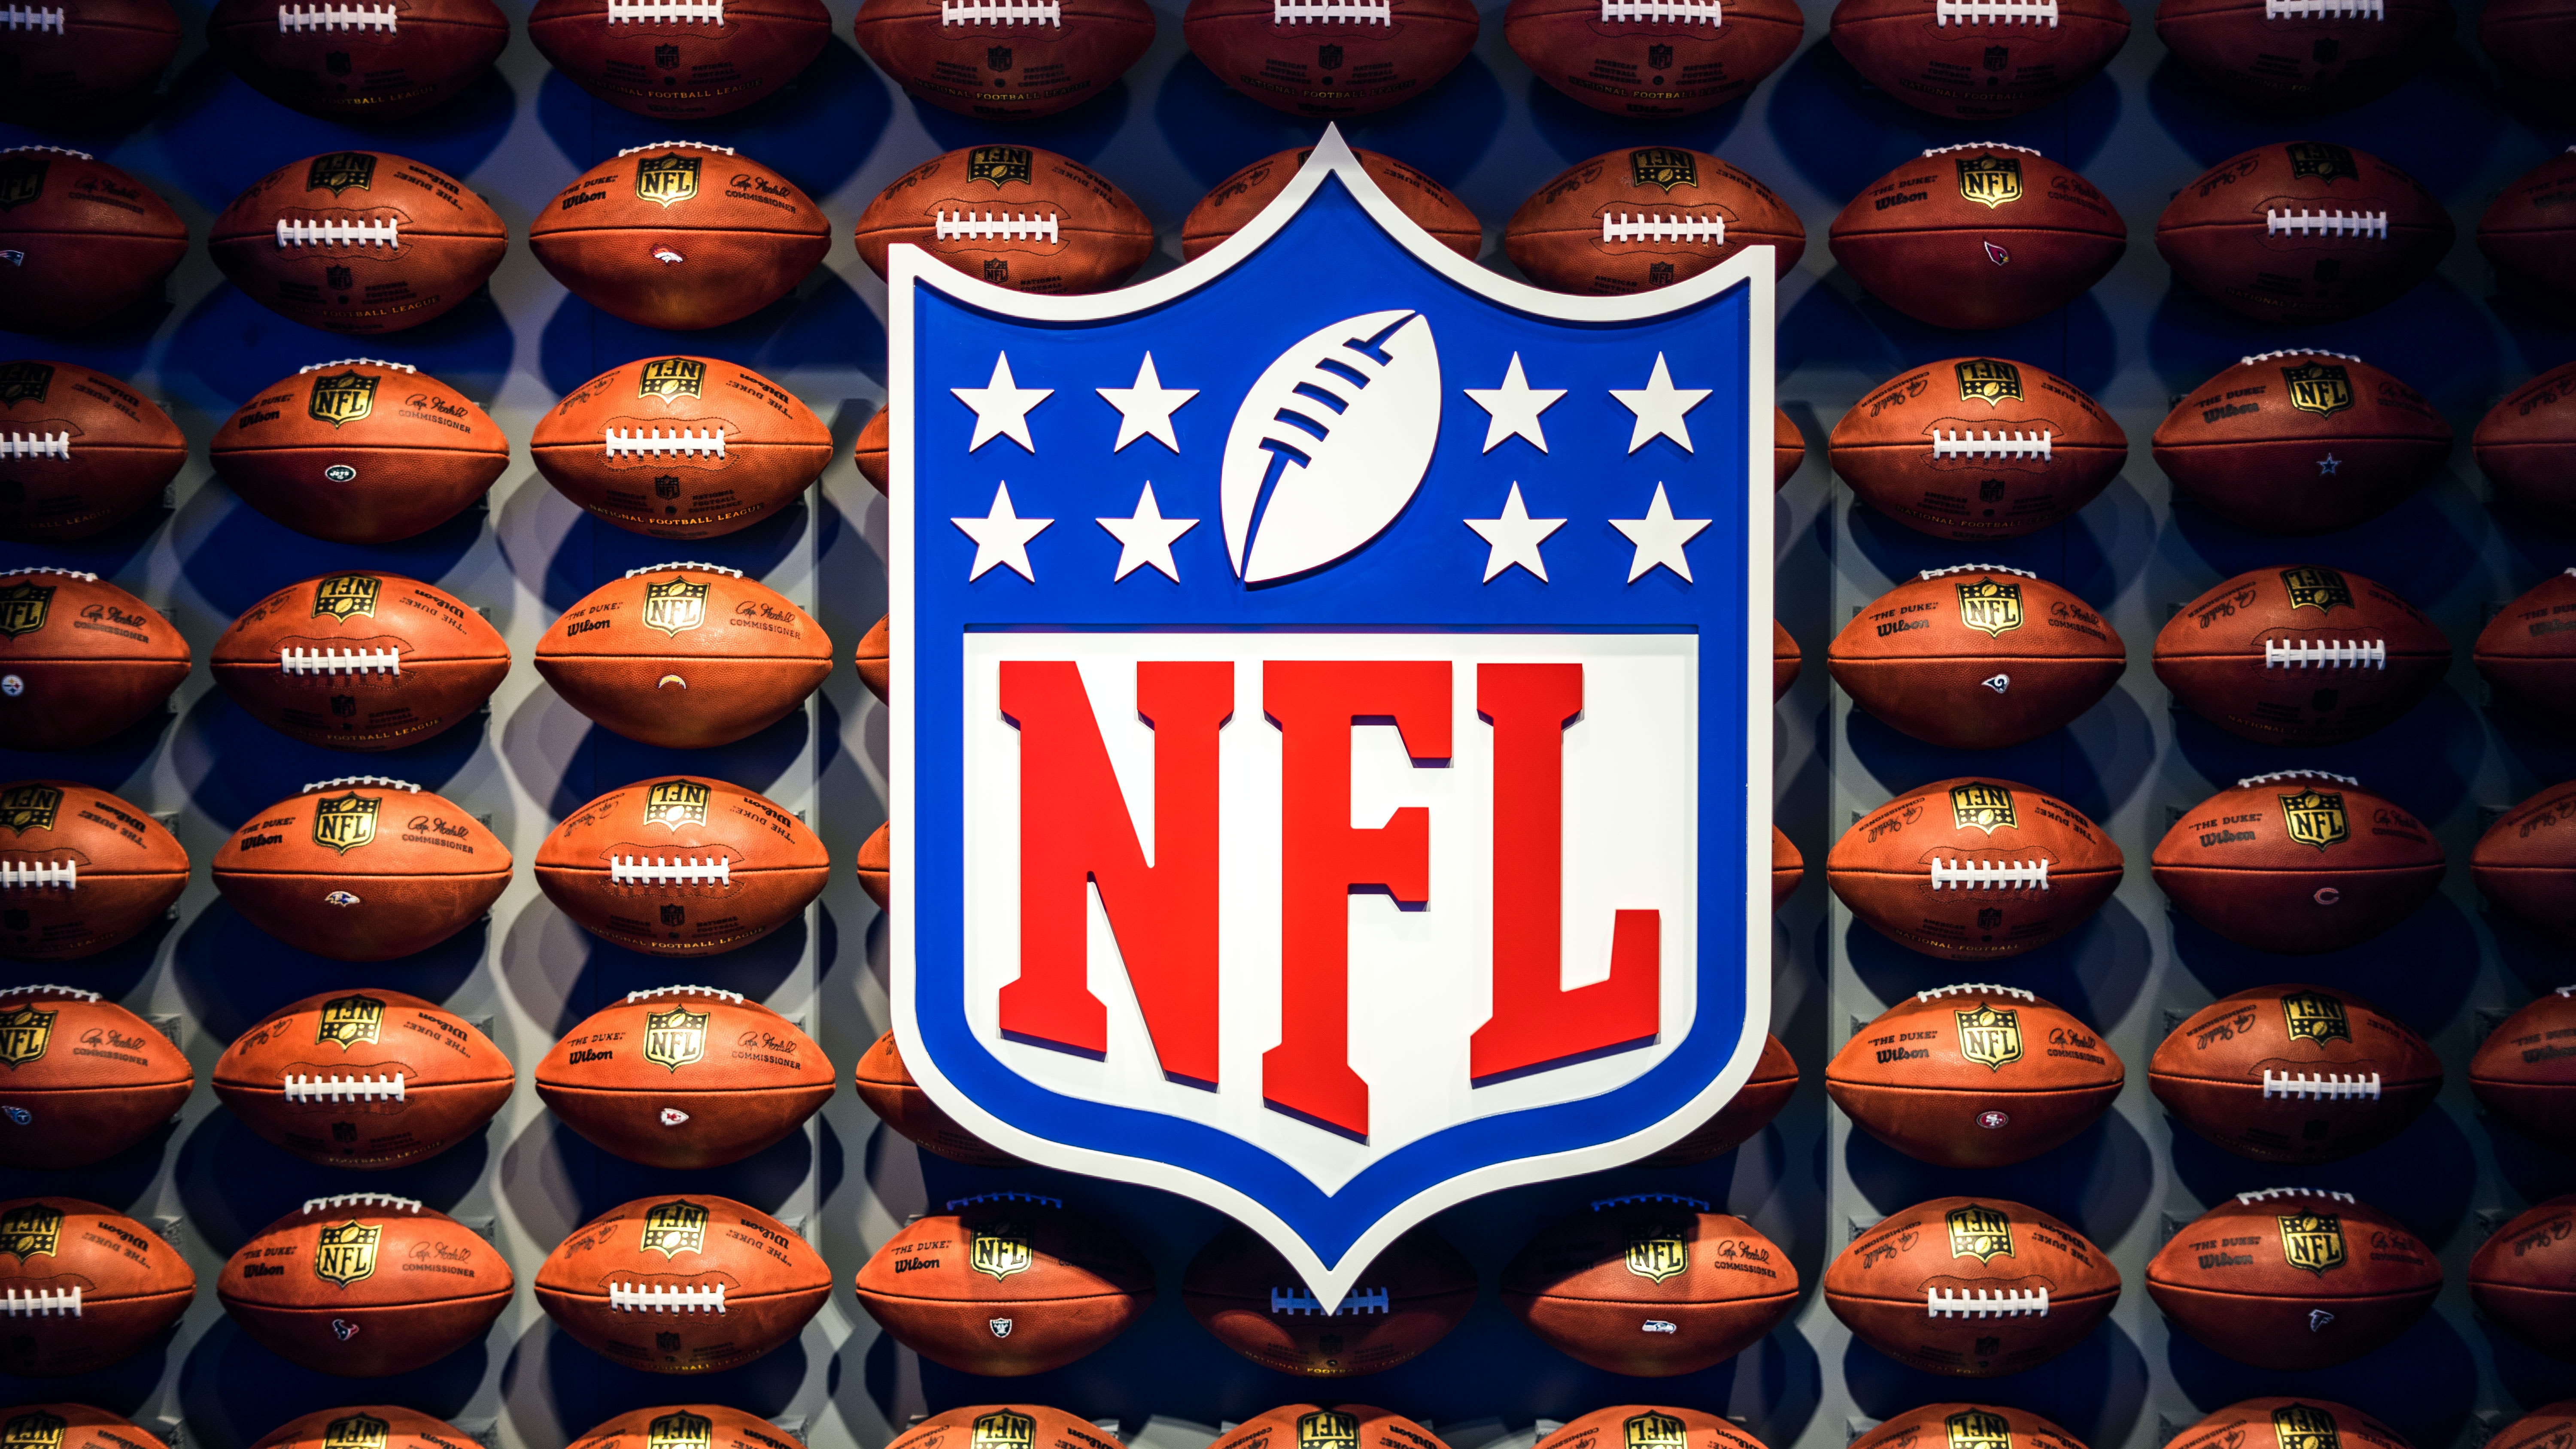 NFL logo with footballs in the background